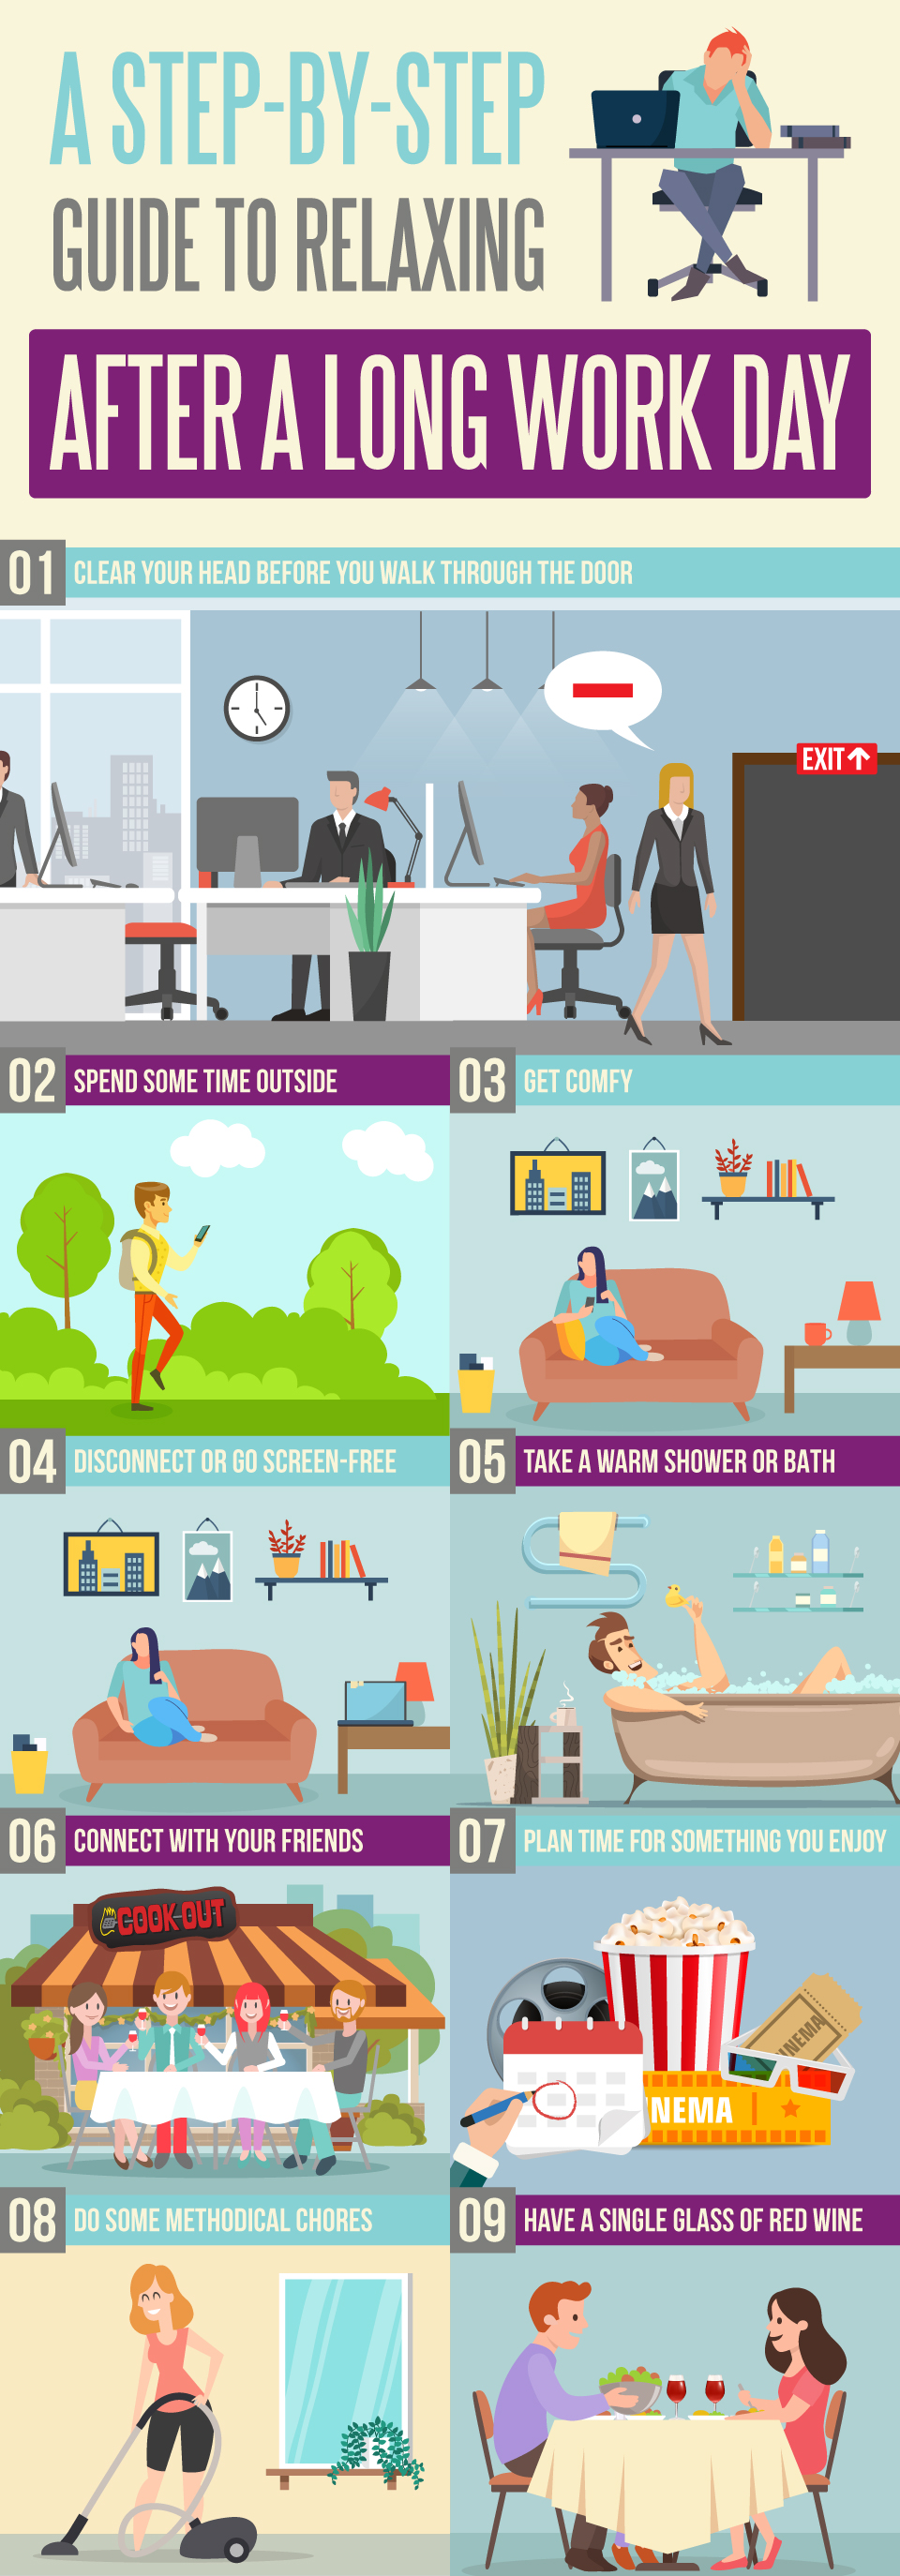 A Step-By-Step Guide to Relaxing After a Long Work Day